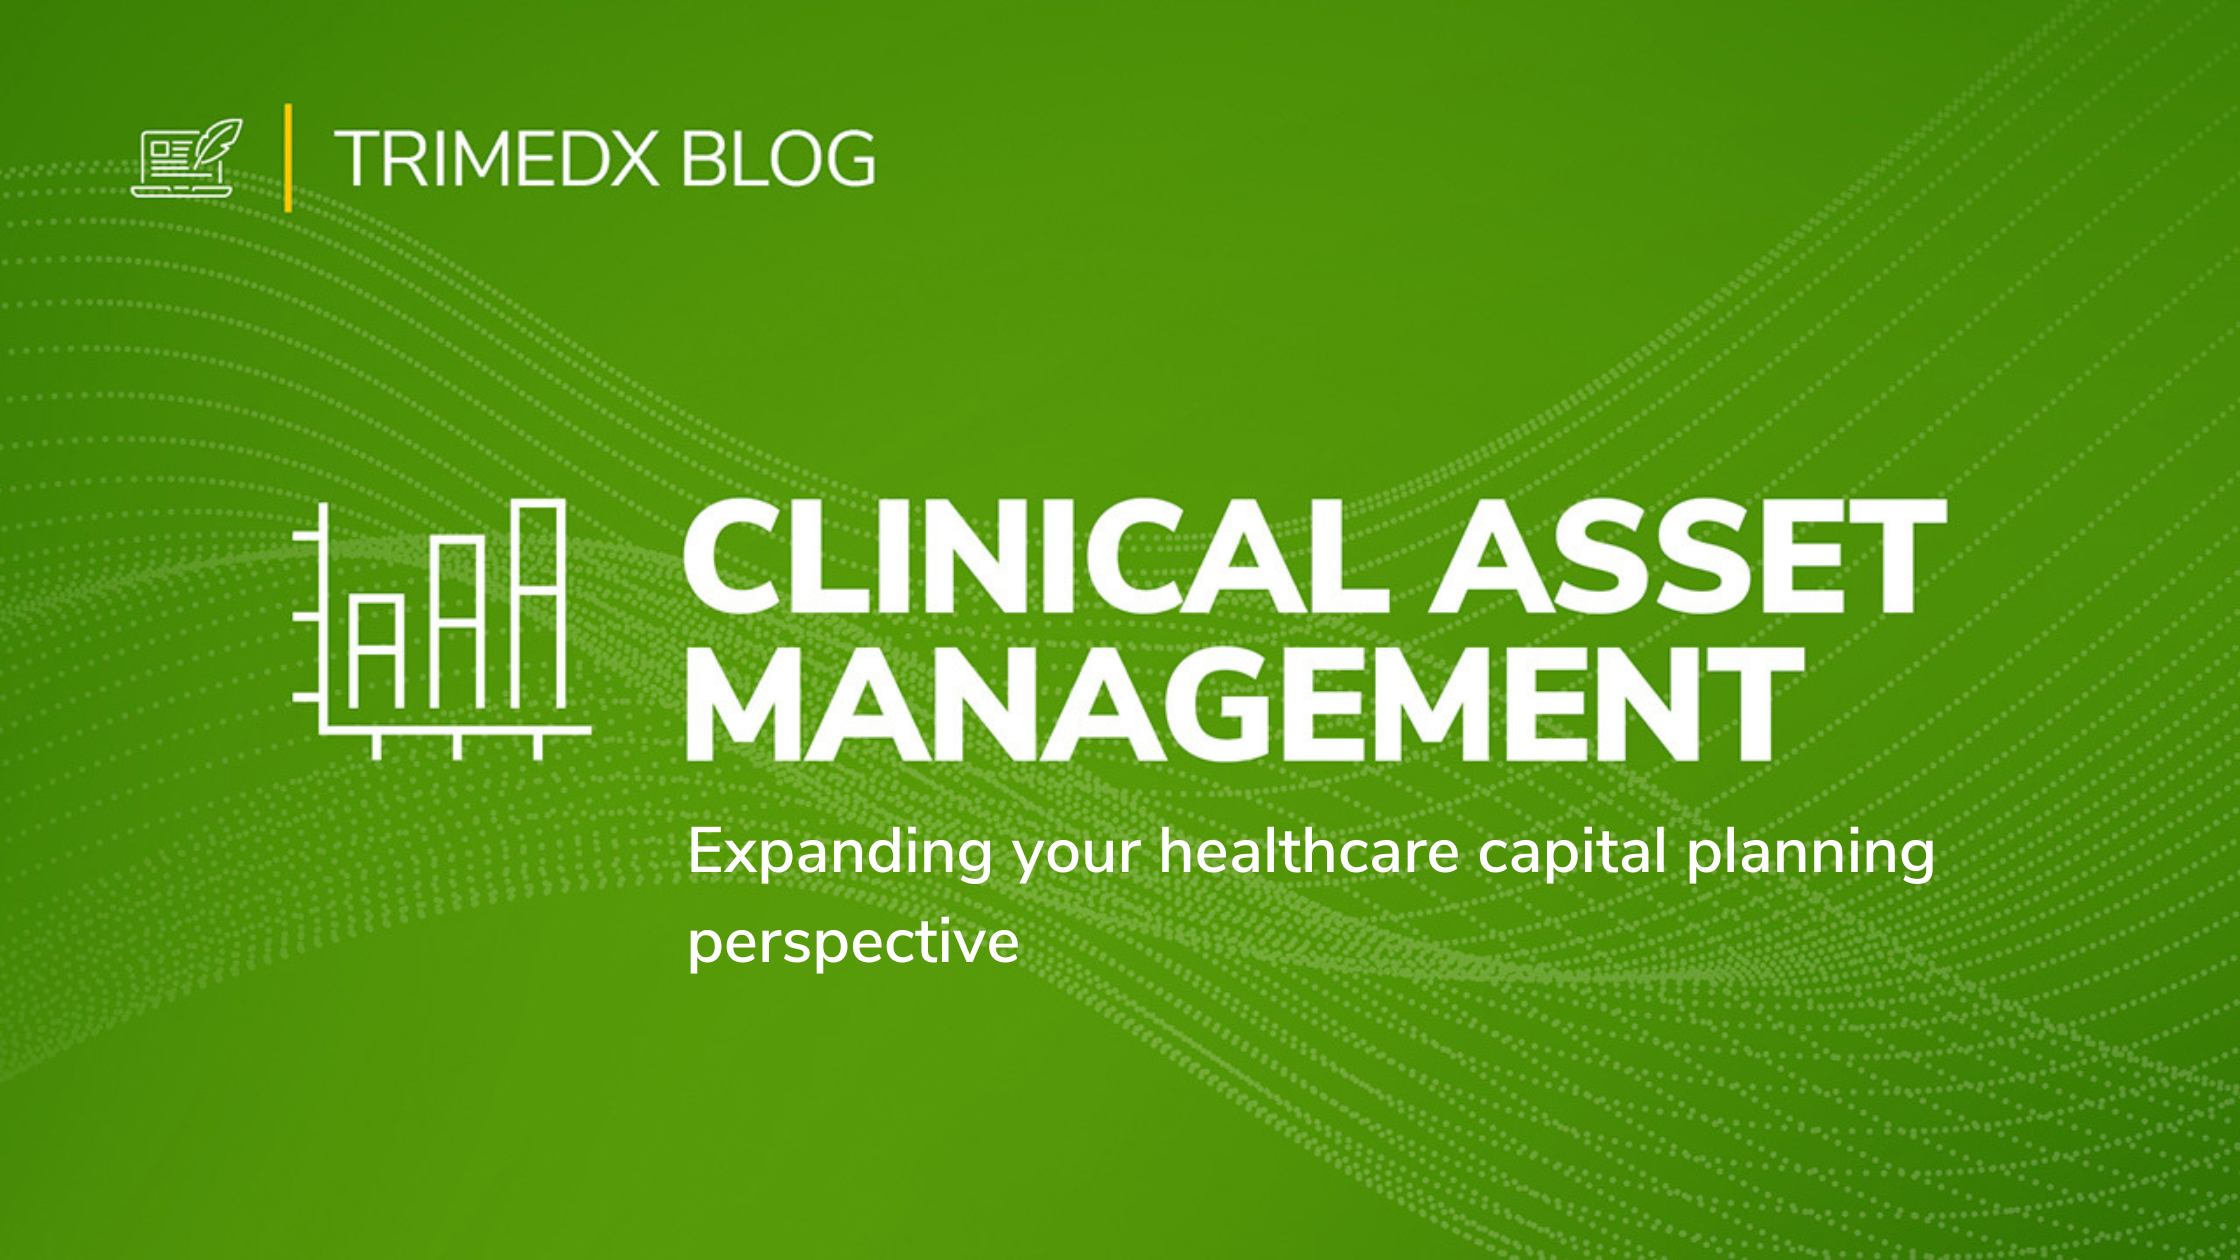 Expanding your healthcare capital planning perspective